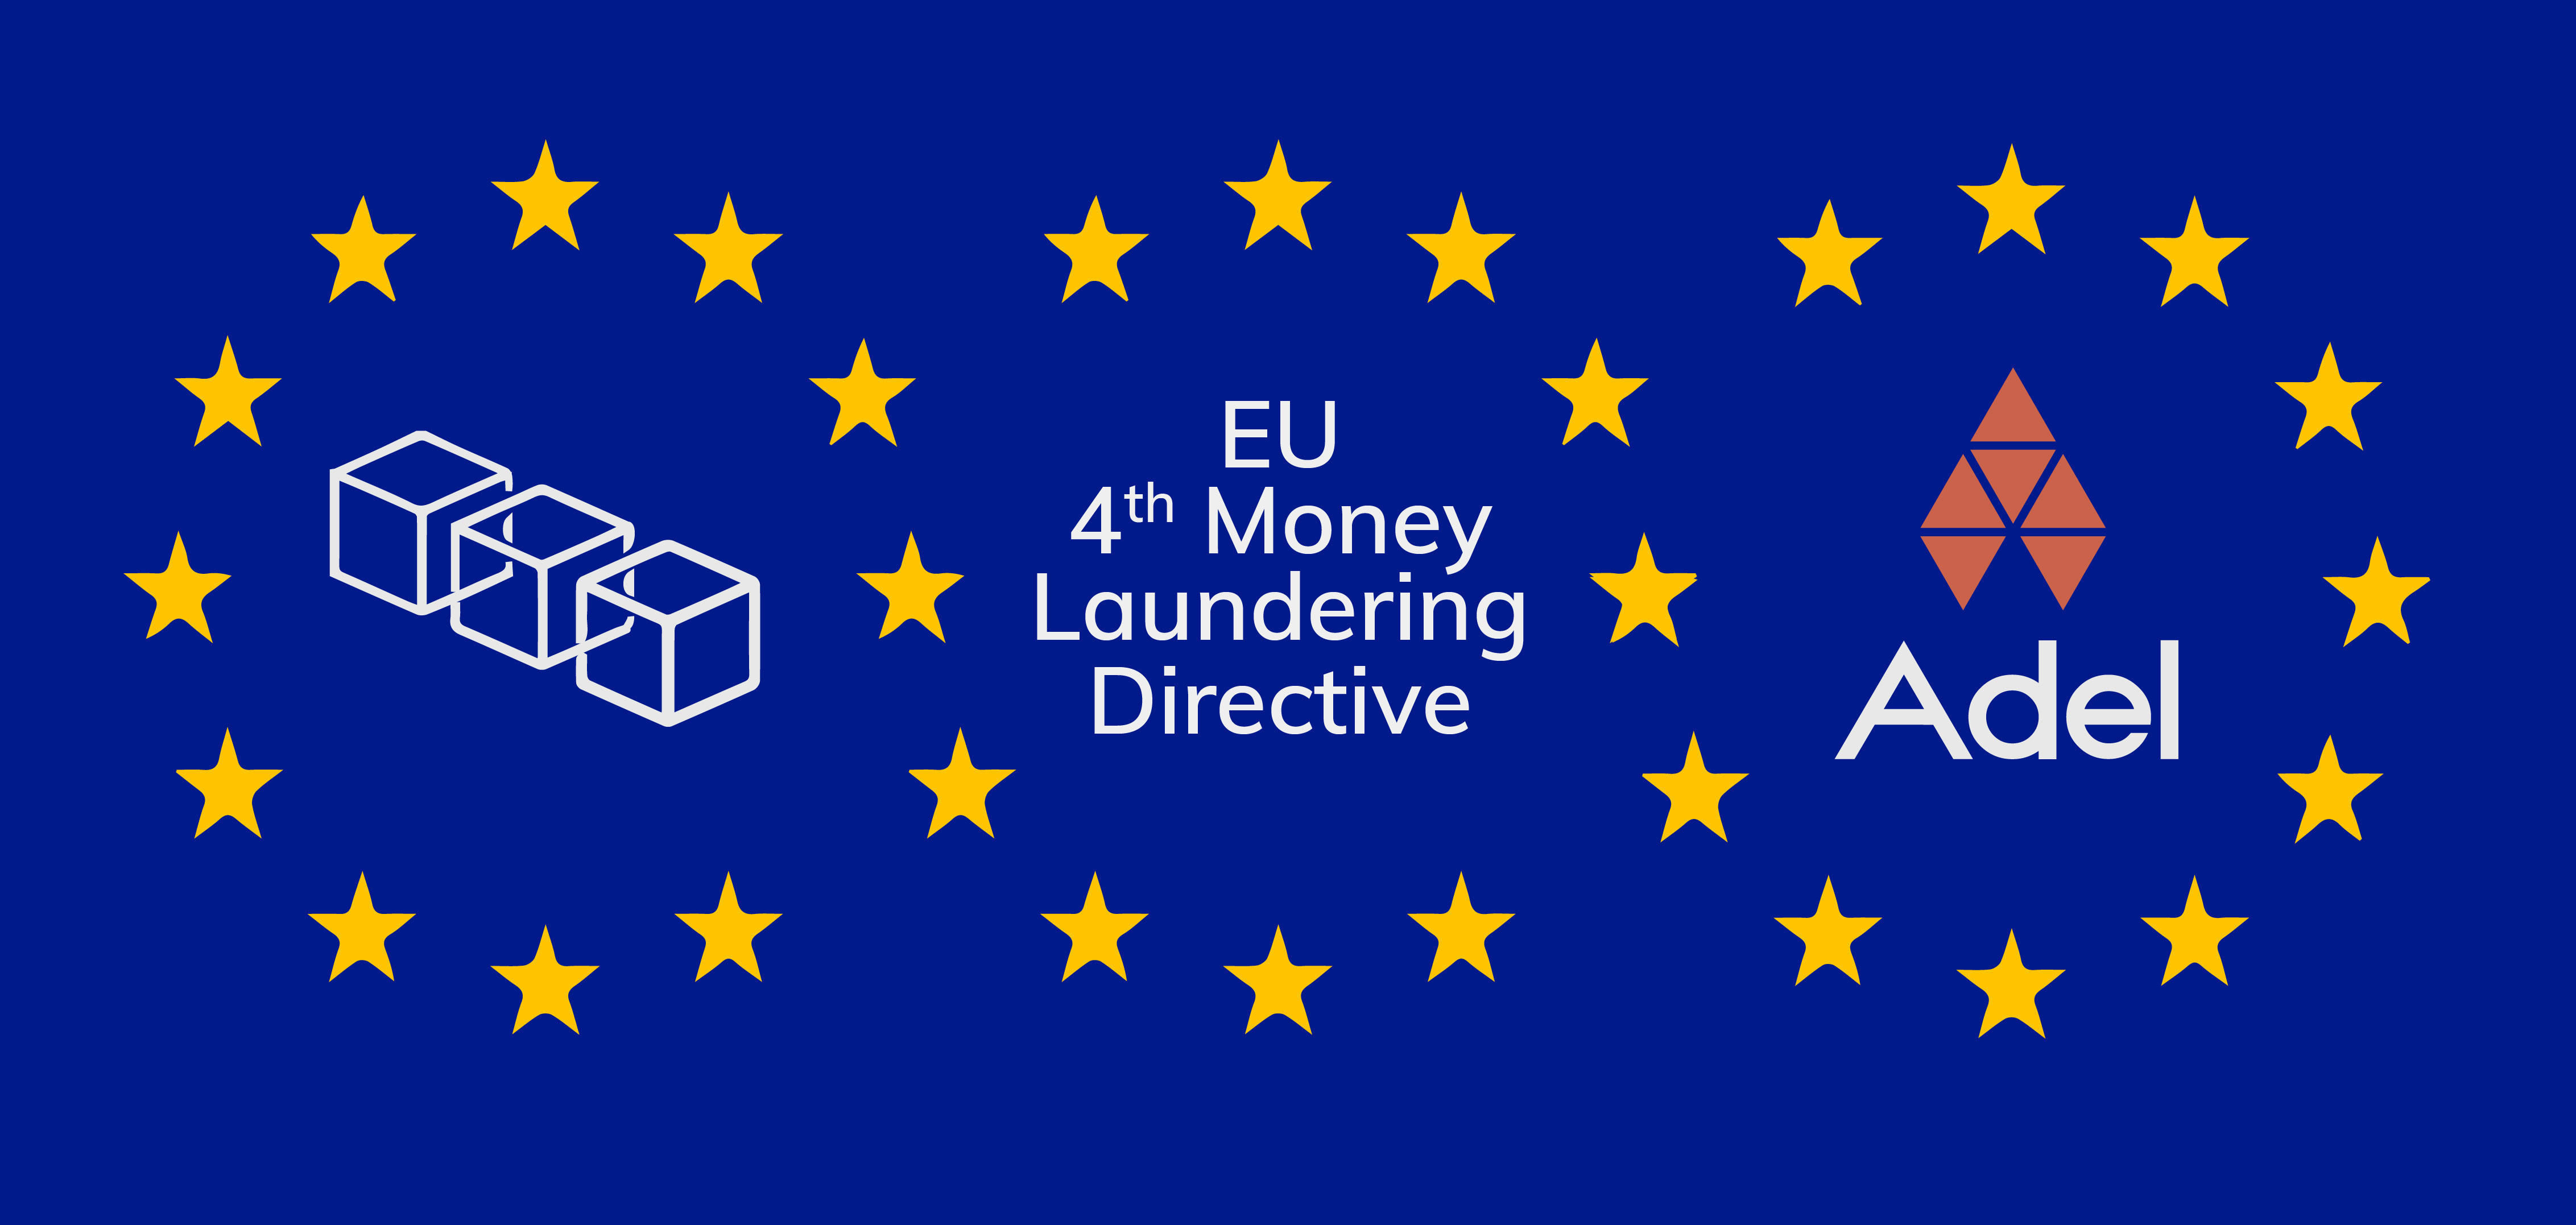 Adel - Opinion (3. A Philosophy for Blockchain Integrity, 4th Anti-Money Laundering Directive).jpg